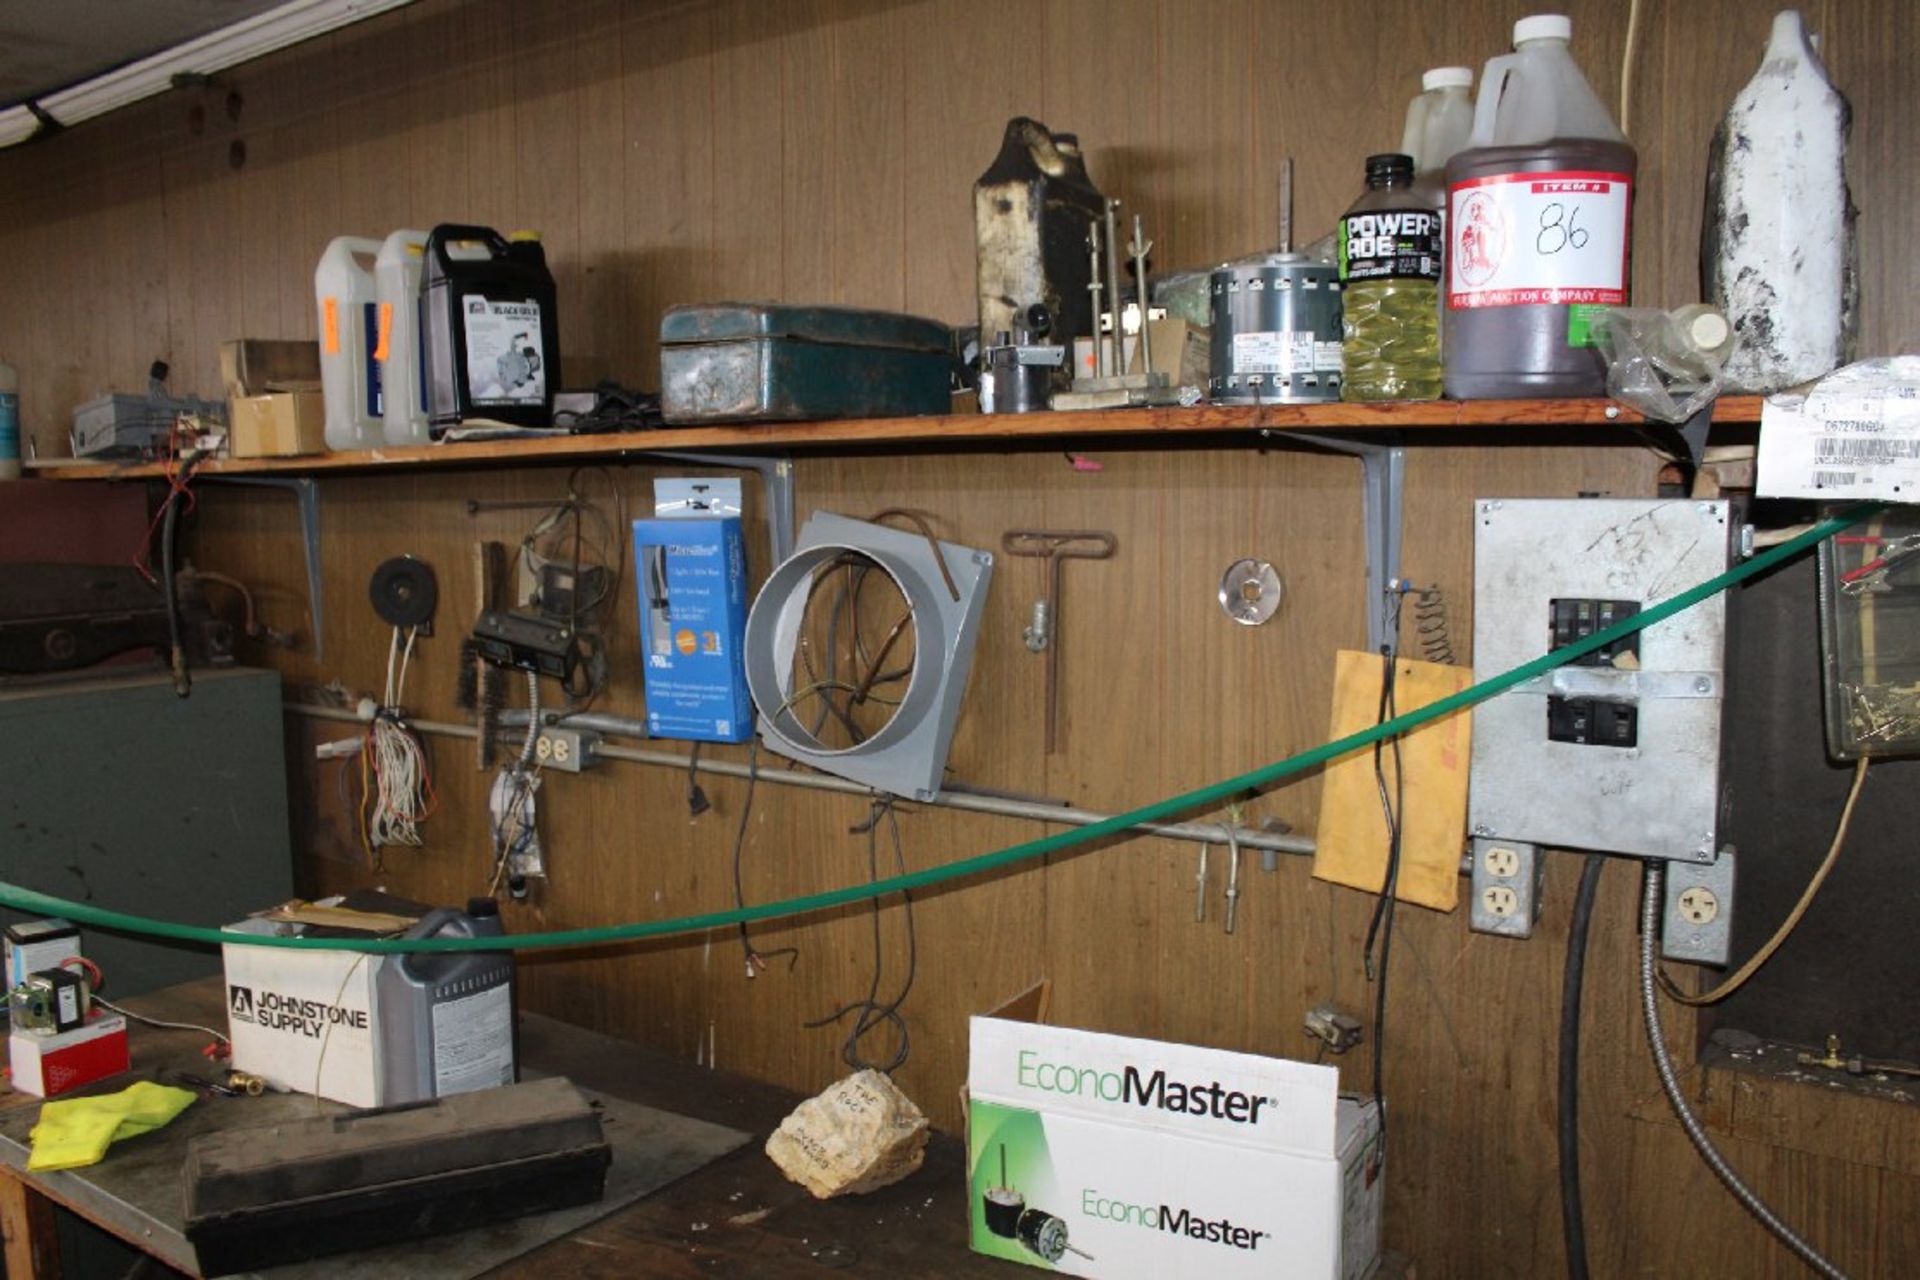 Everything Behind Green Ribbon (vacuum pump oil, electrical components, file cabinet, refrigerator/